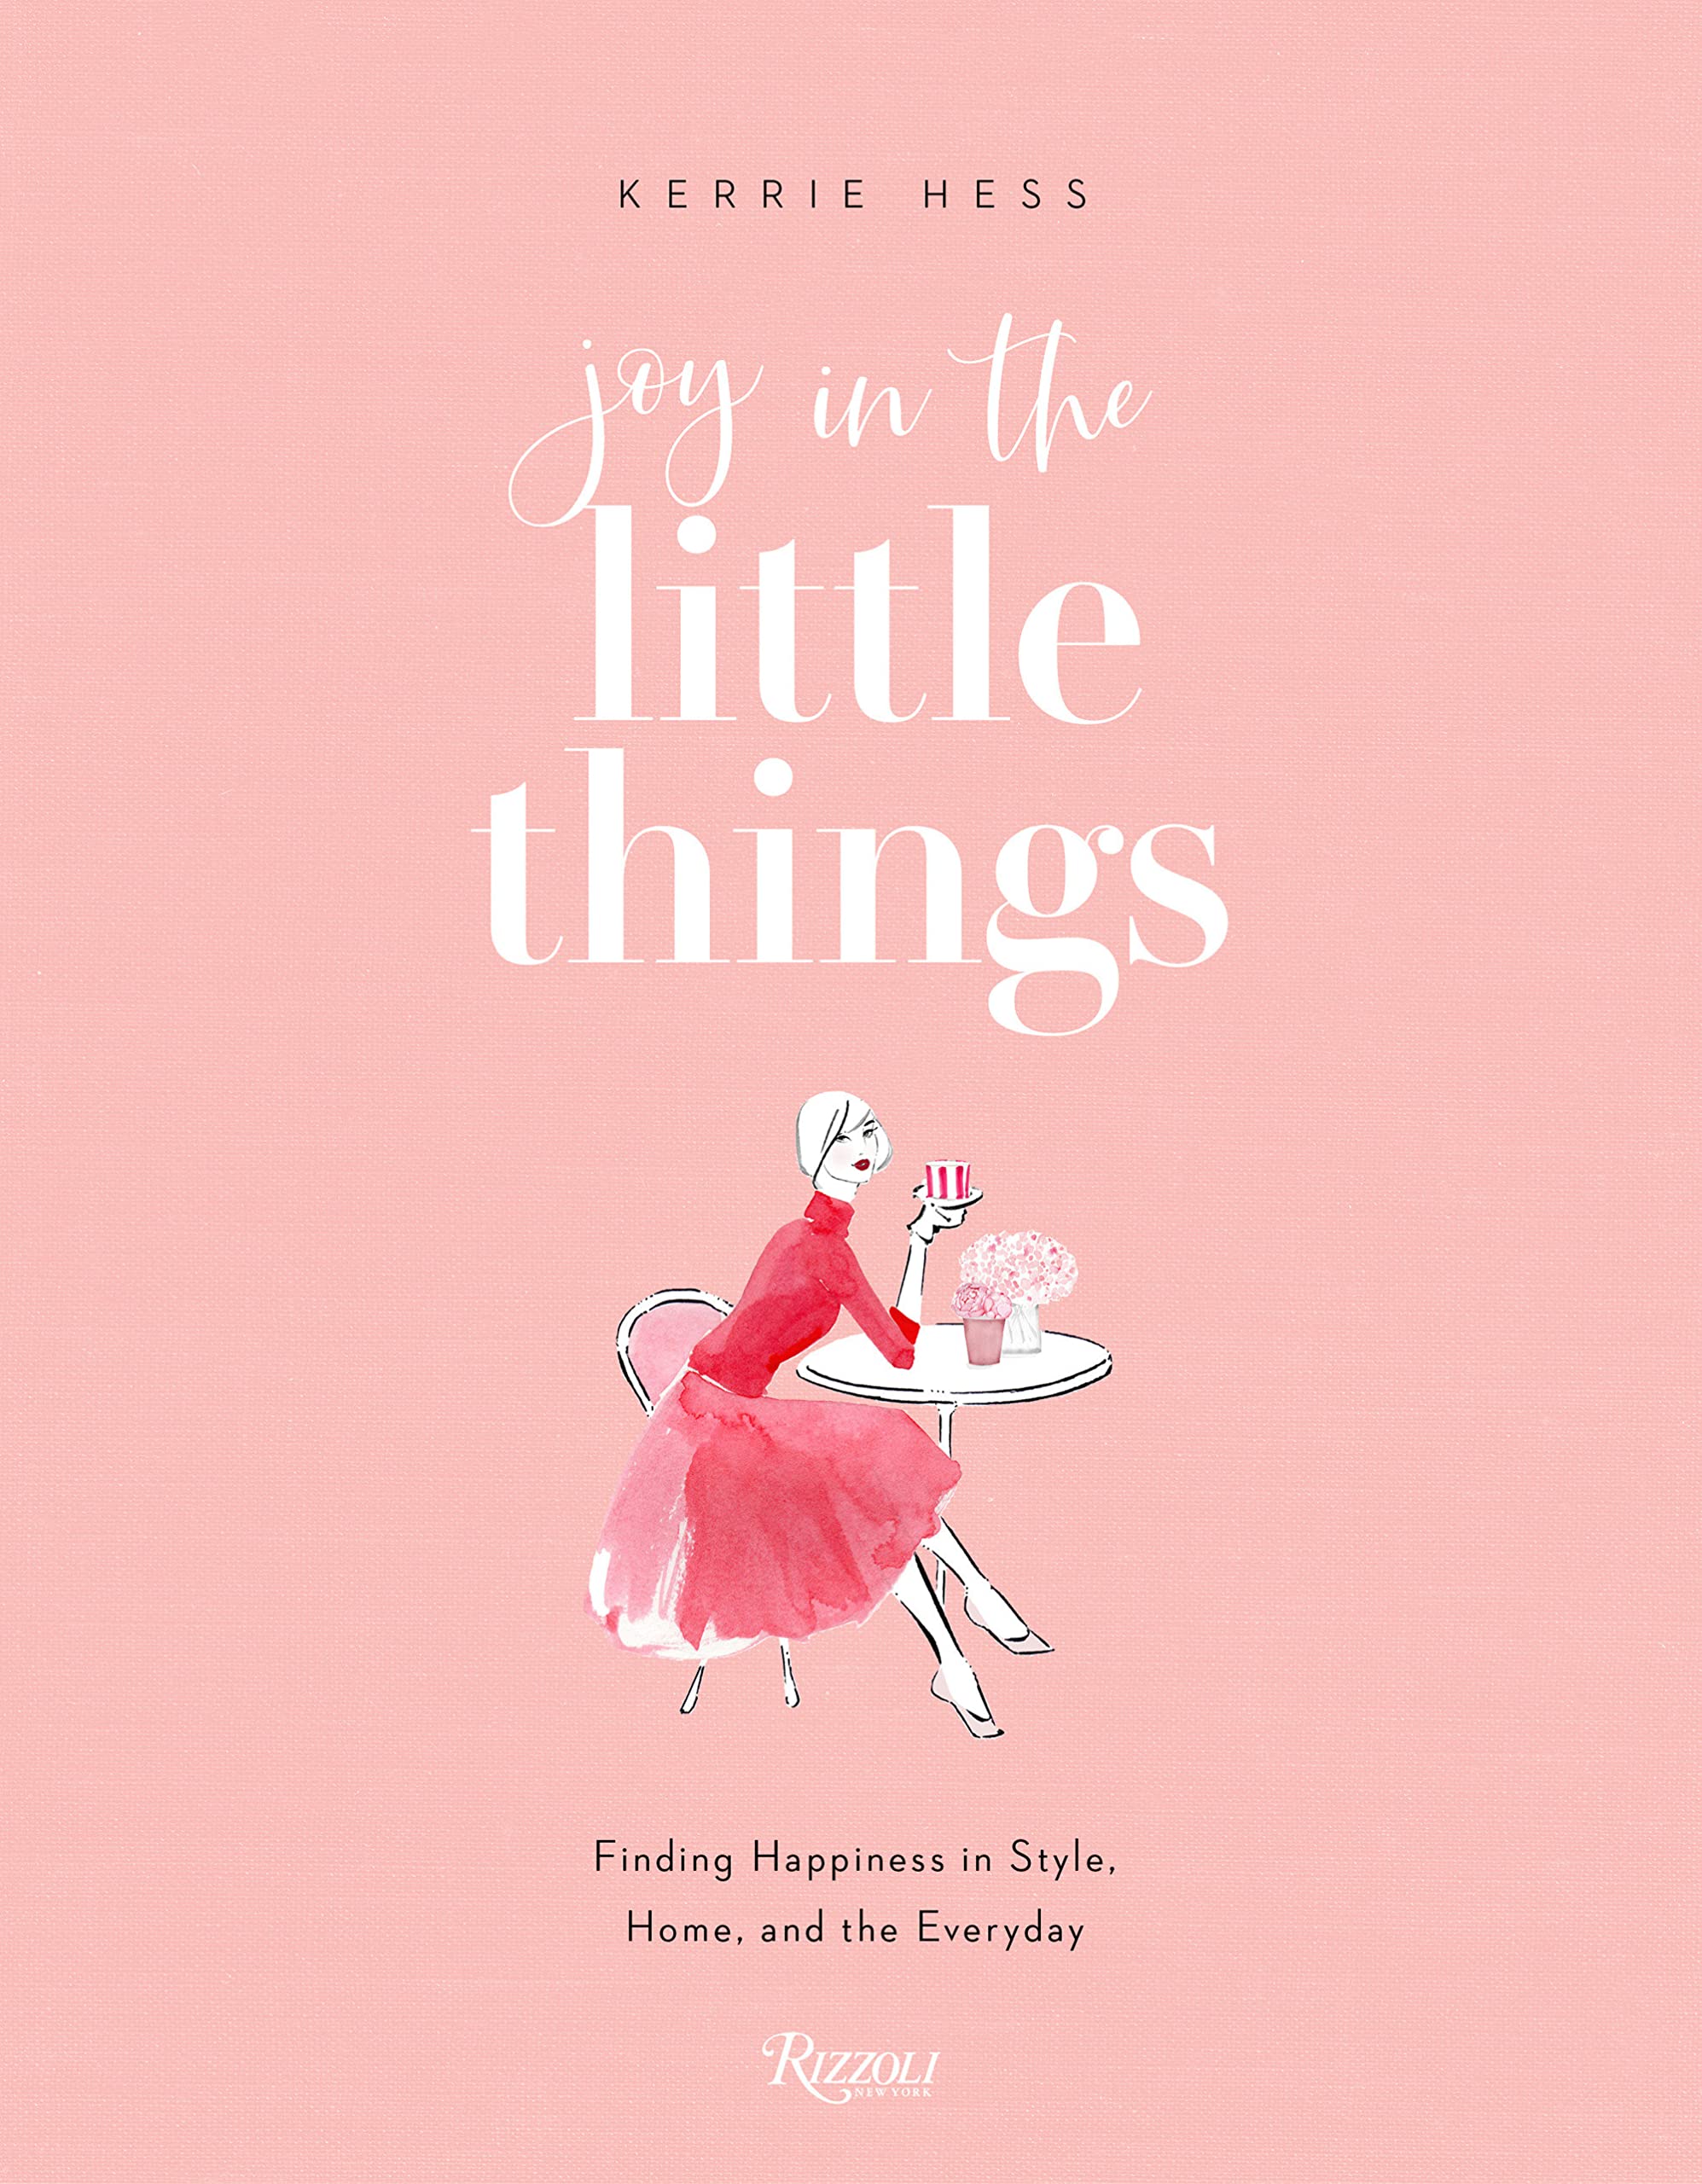 The Little Things Poster Wallpapers